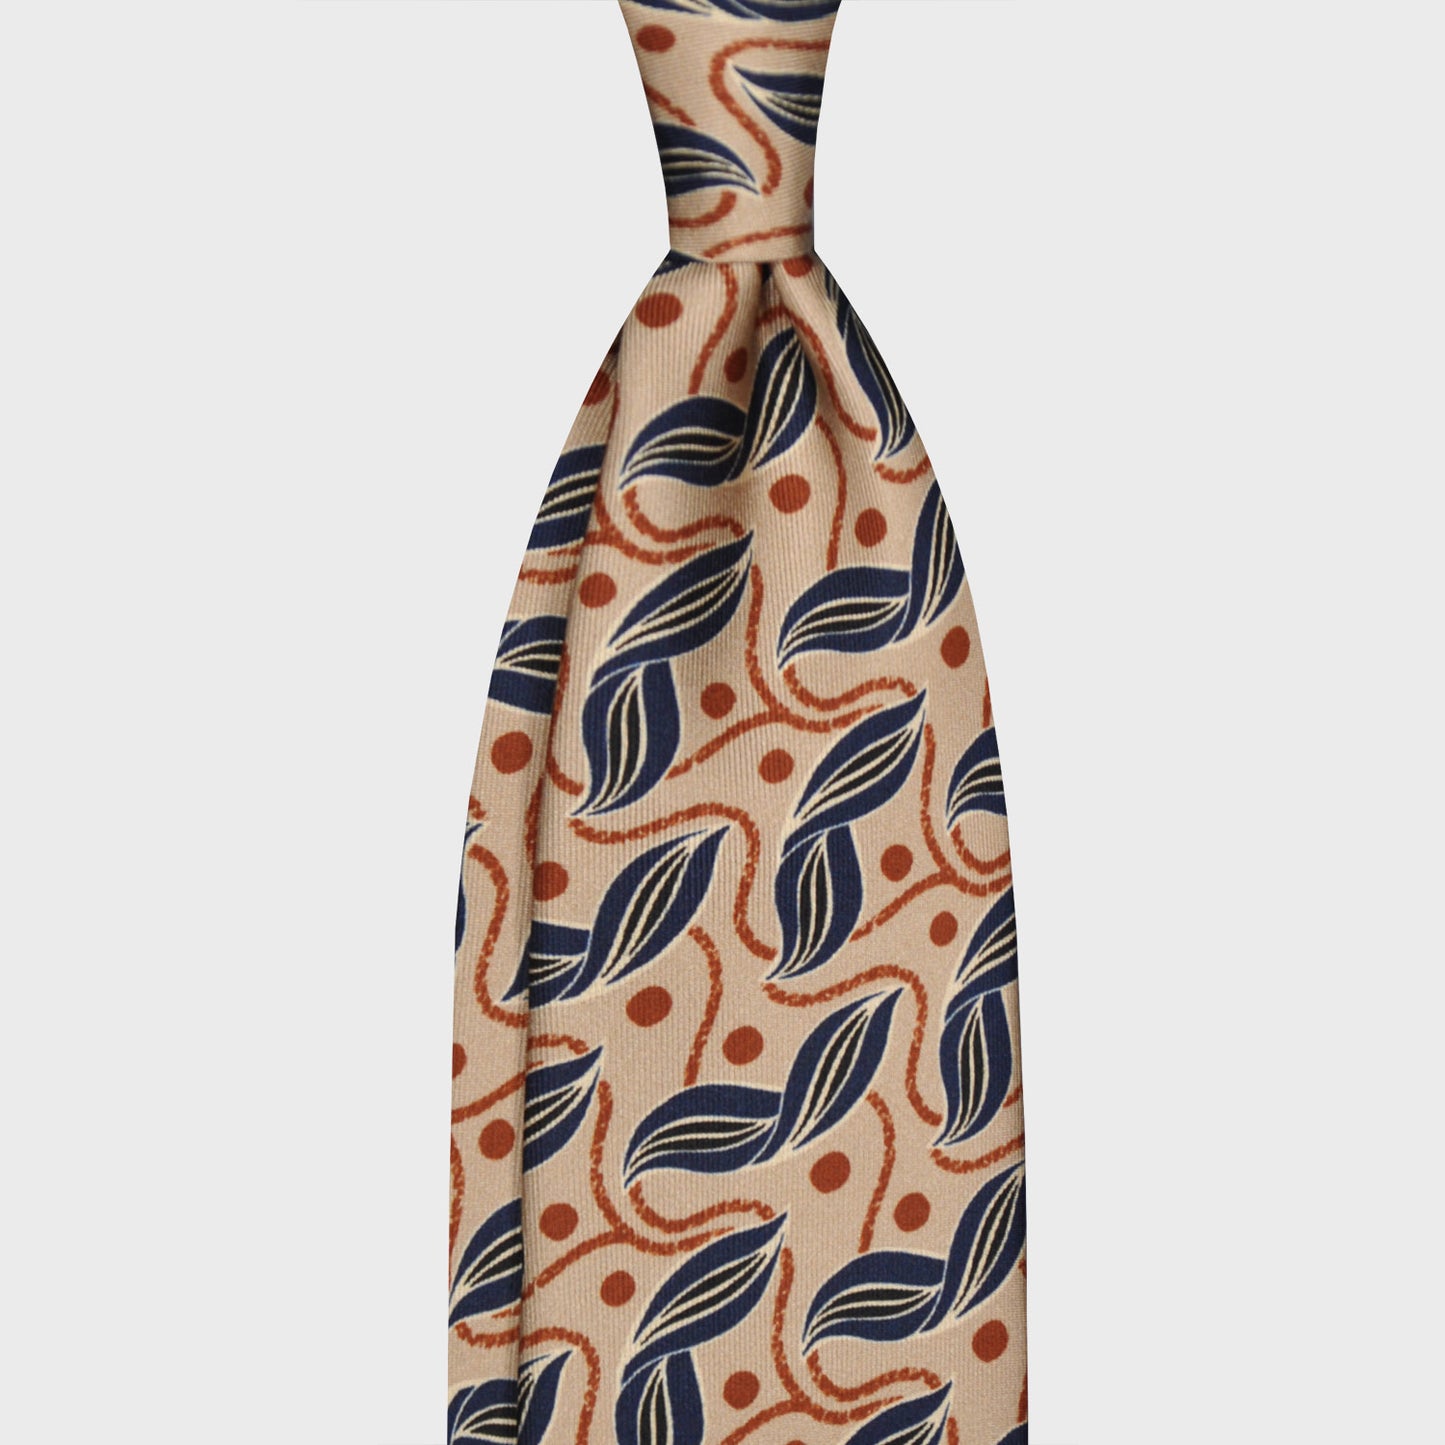 Load image into Gallery viewer, F.Marino Silk Tie Handmade 3 Folds Liberty Leaves Beige-Wools Boutique Uomo
